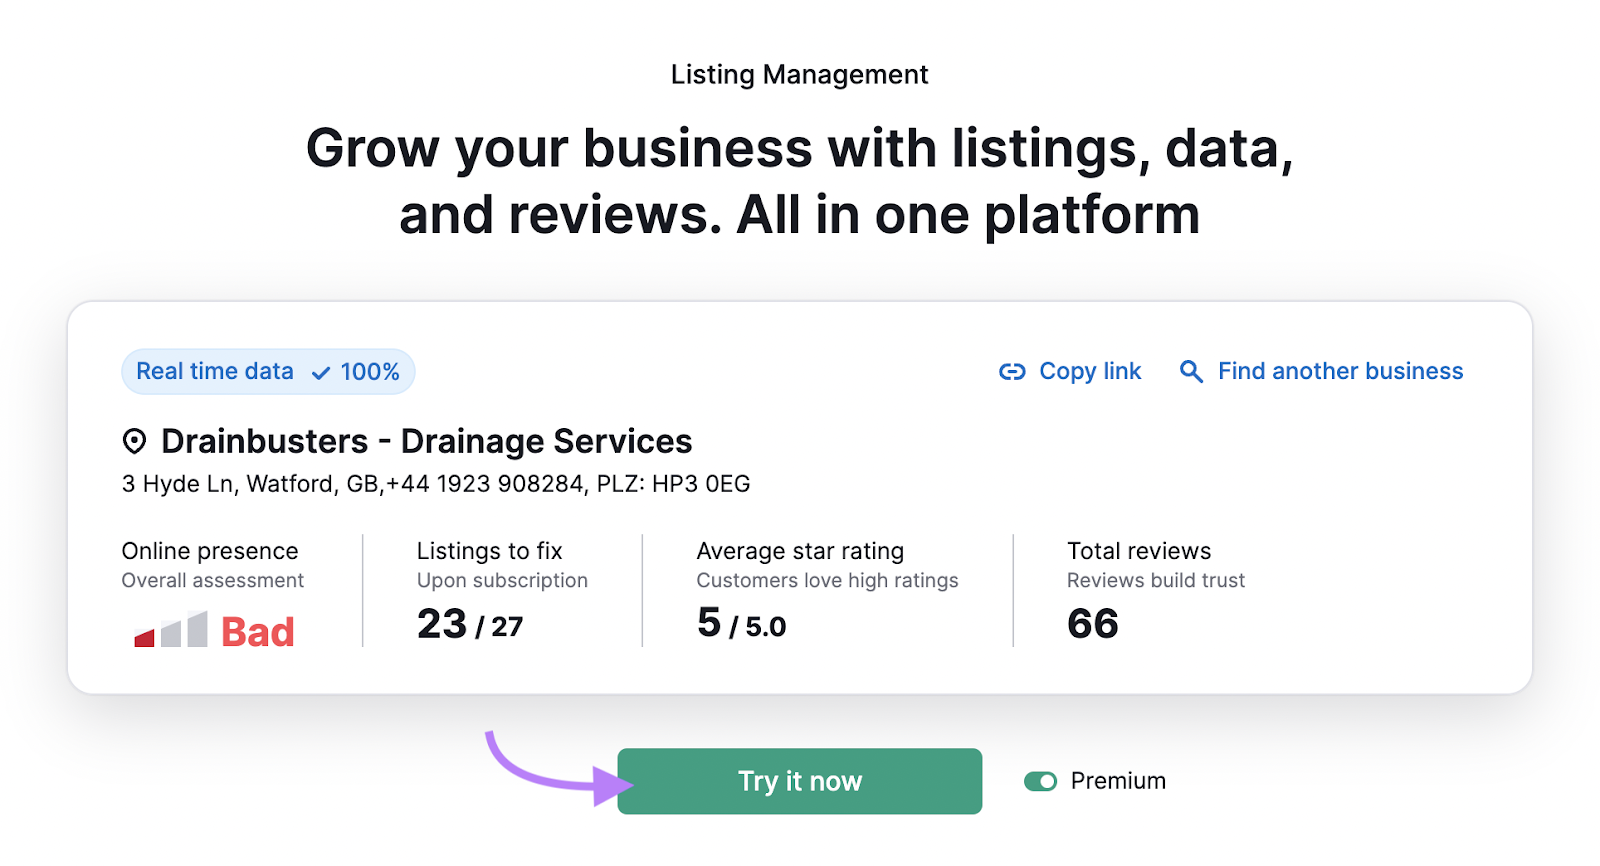 “Try it now” button selected under Listing Management tool